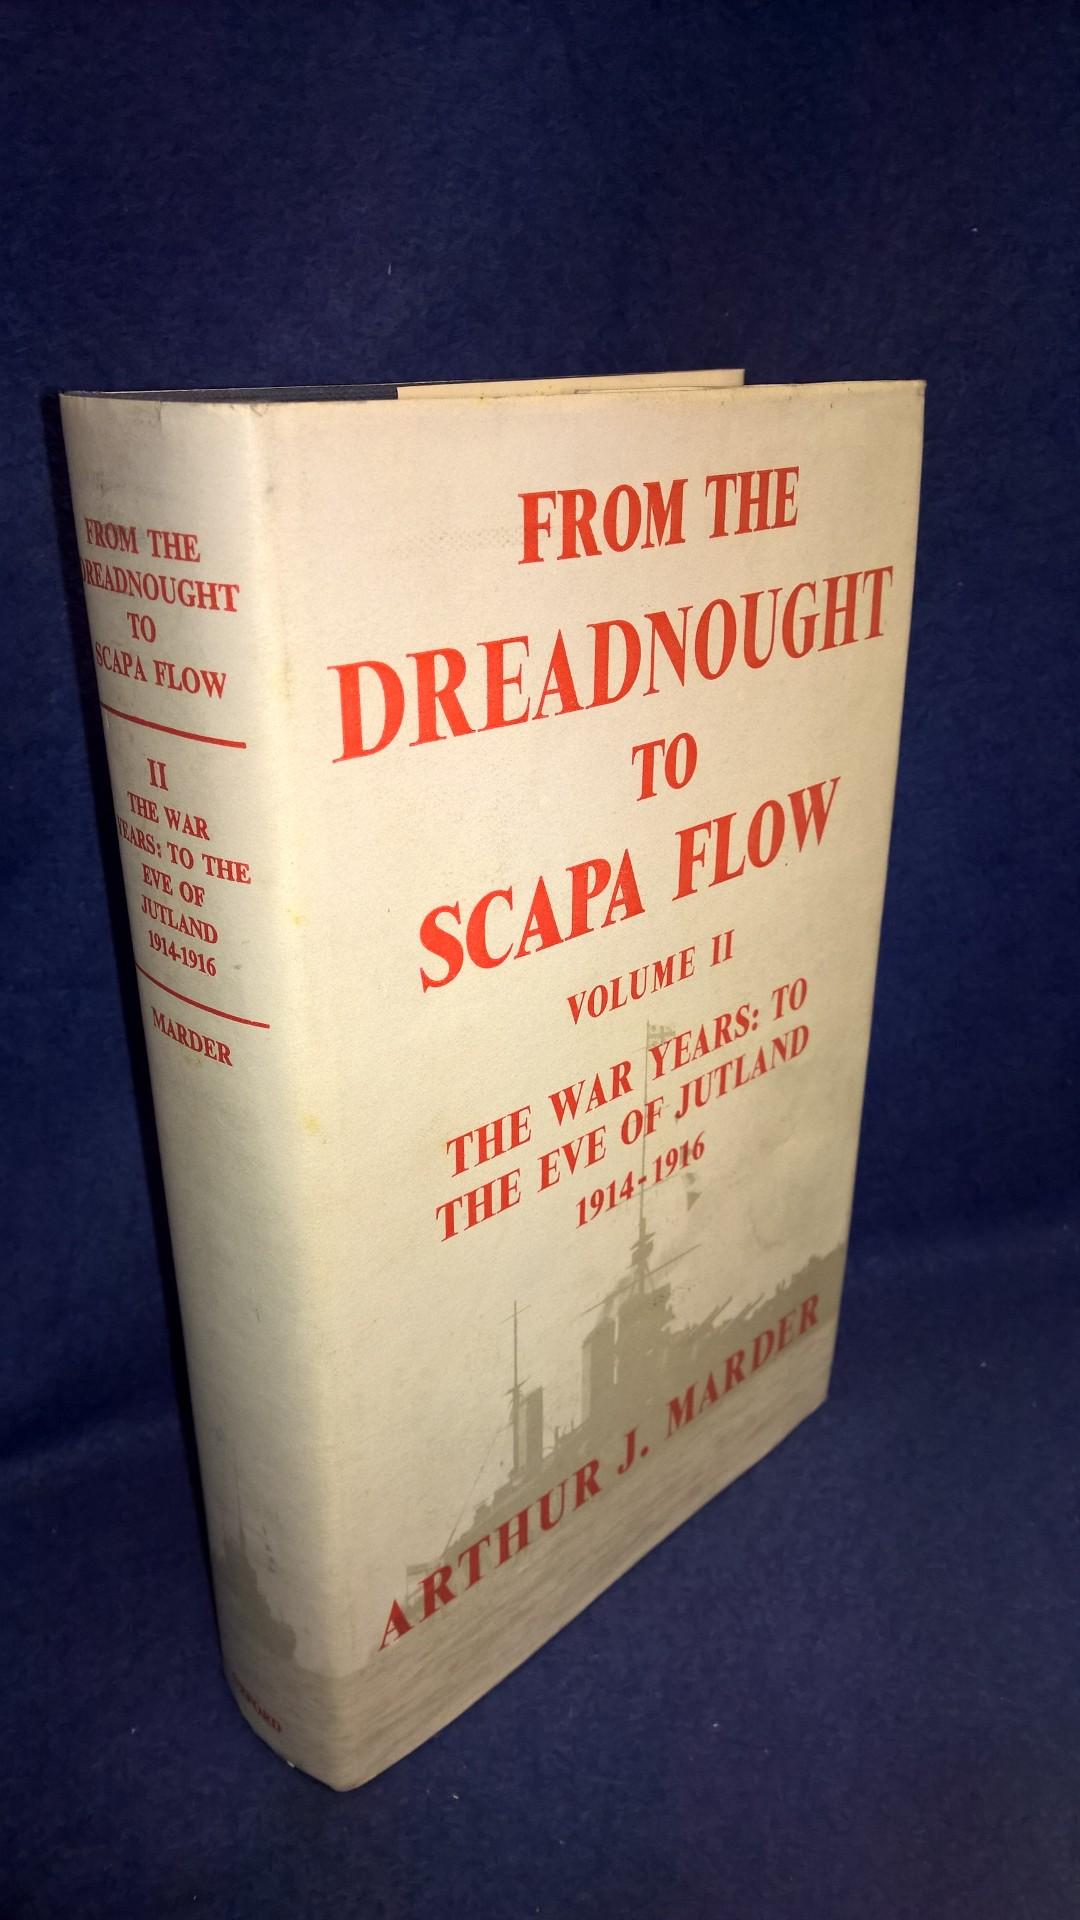 From the Dreadnought to Scapa Flow. Volume II. The War Years: to the Eve of Jutland 1914-1916.